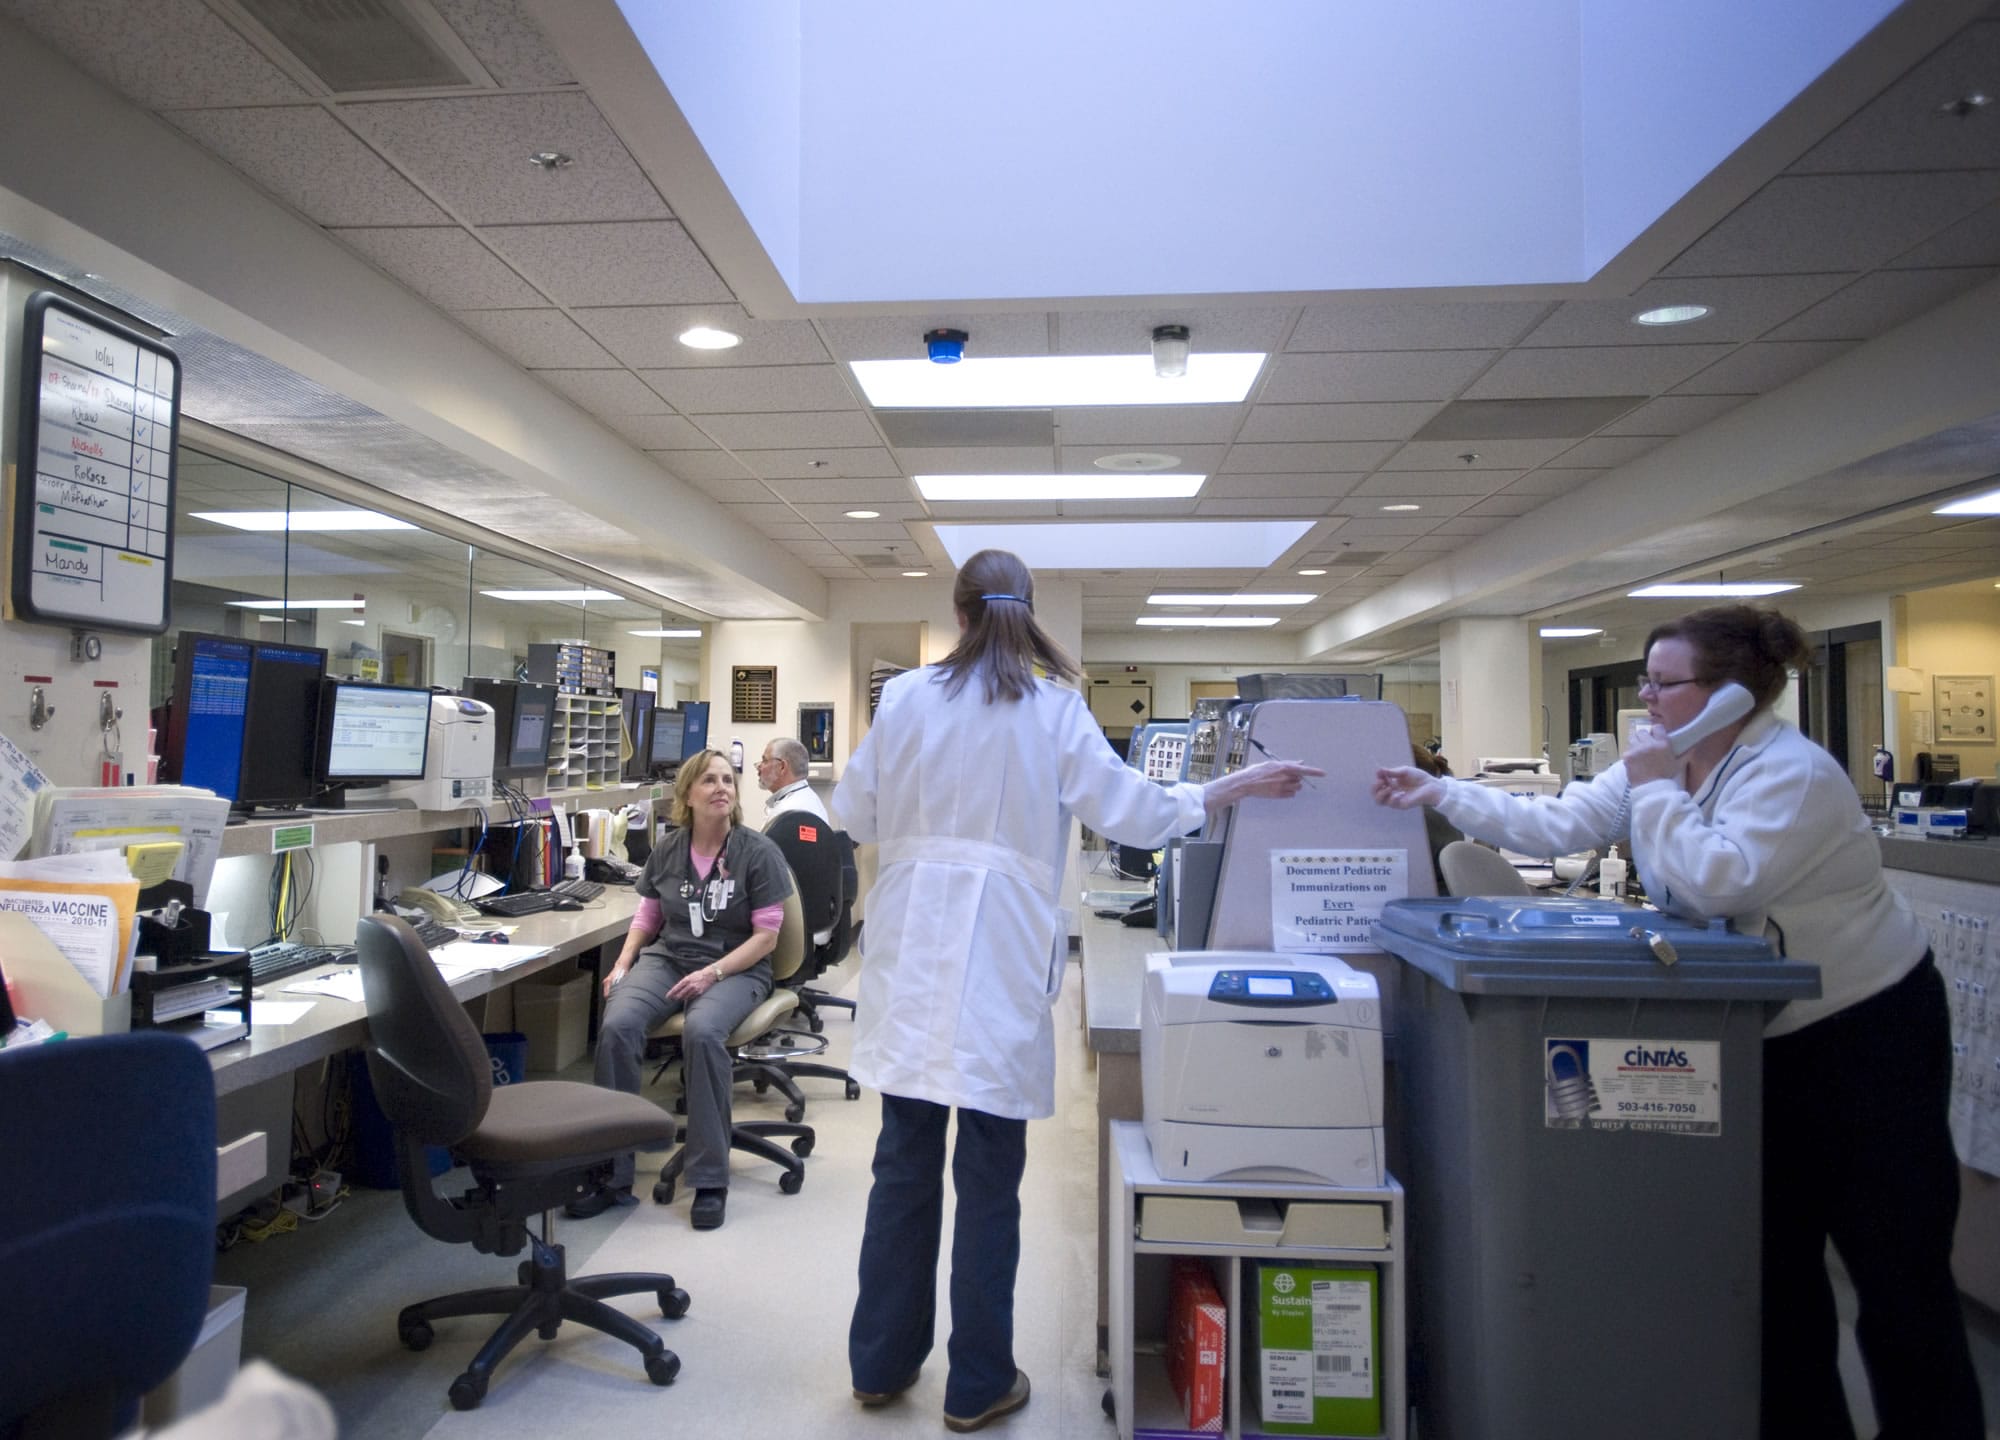 The emergency department at PeaceHealth Southwest Medical Center is a Level II trauma center, one of only three designated trauma centers in the Portland metro area.